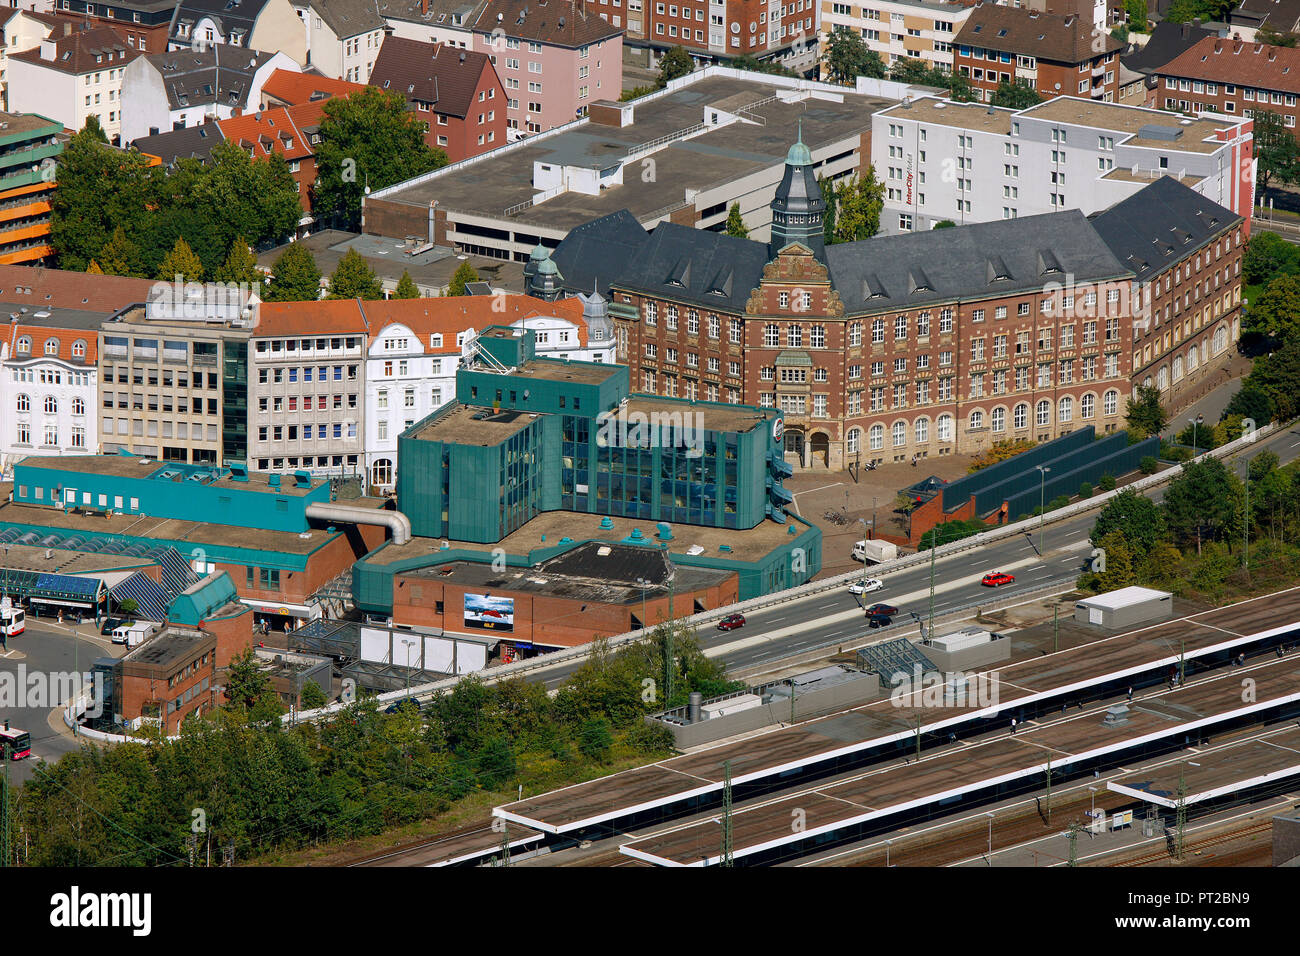 Aerial view, main station and post office building, Gelsenkirchen, Ruhr area, North Rhine-Westphalia, Germany, Europe Stock Photo